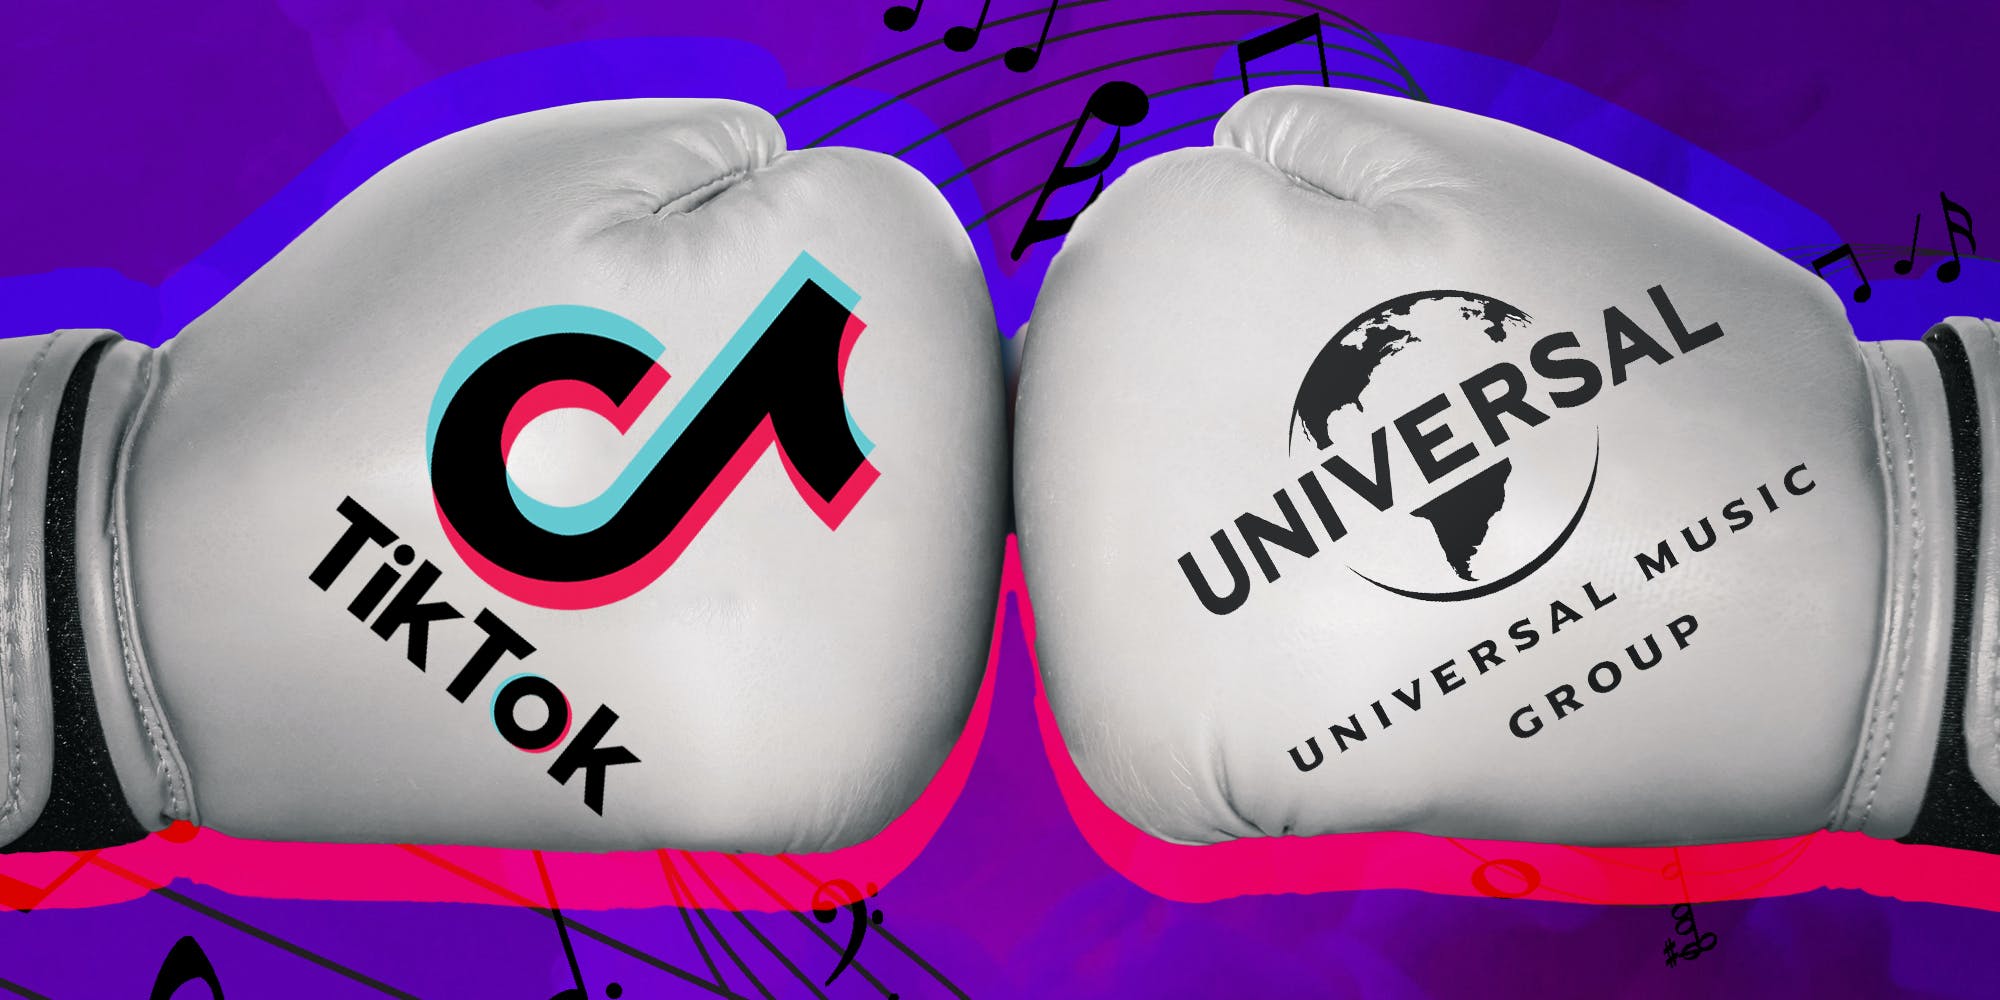 Creators say TikTok is the ‘music industry’s Roman empire’ in the wake of UMG’s war